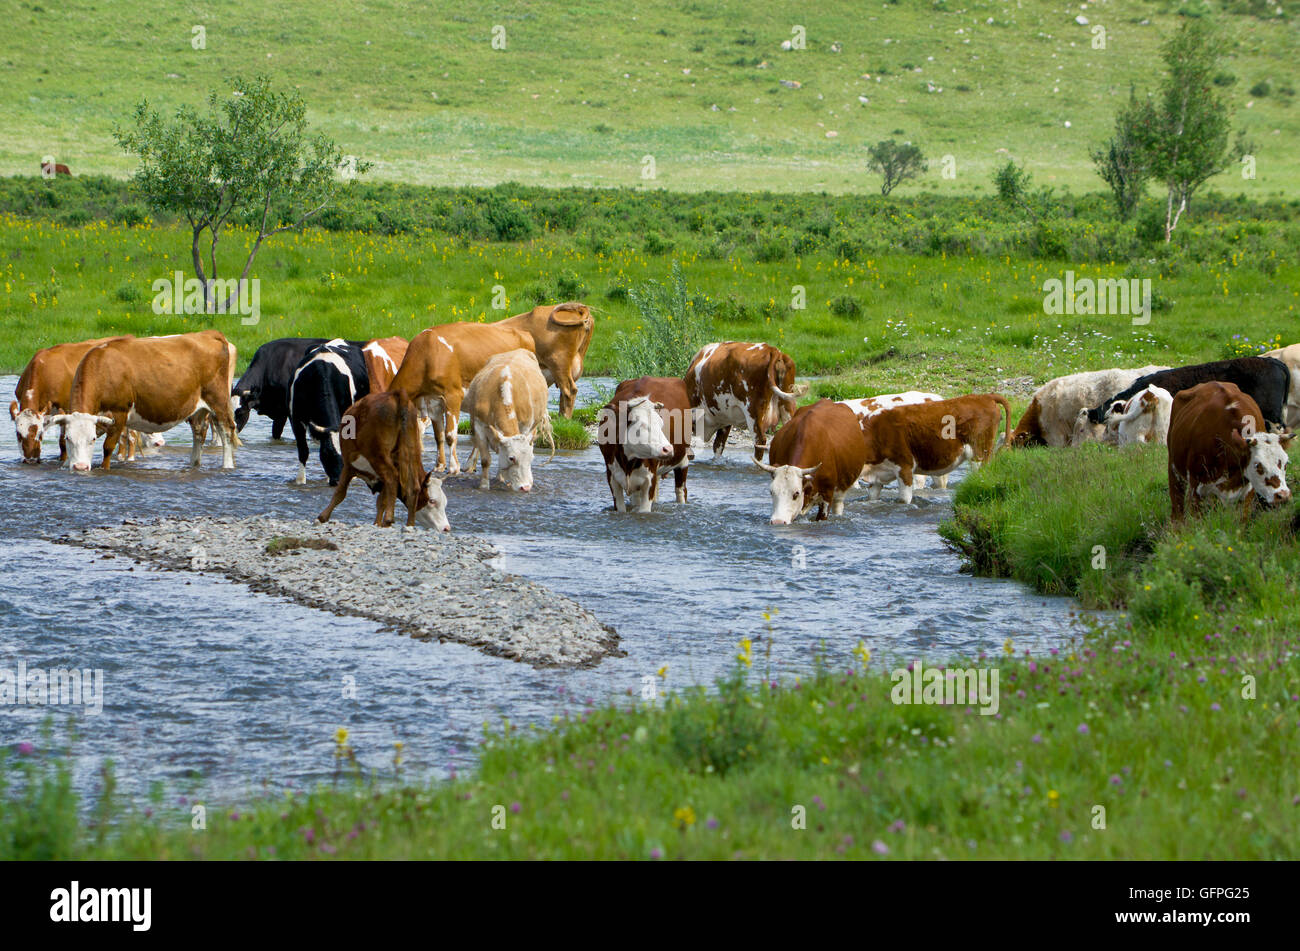 pets of a cow on a watering place at the river,a landscape, a pasture, a watering place, cattle, cows, horned, landscape, nature Stock Photo